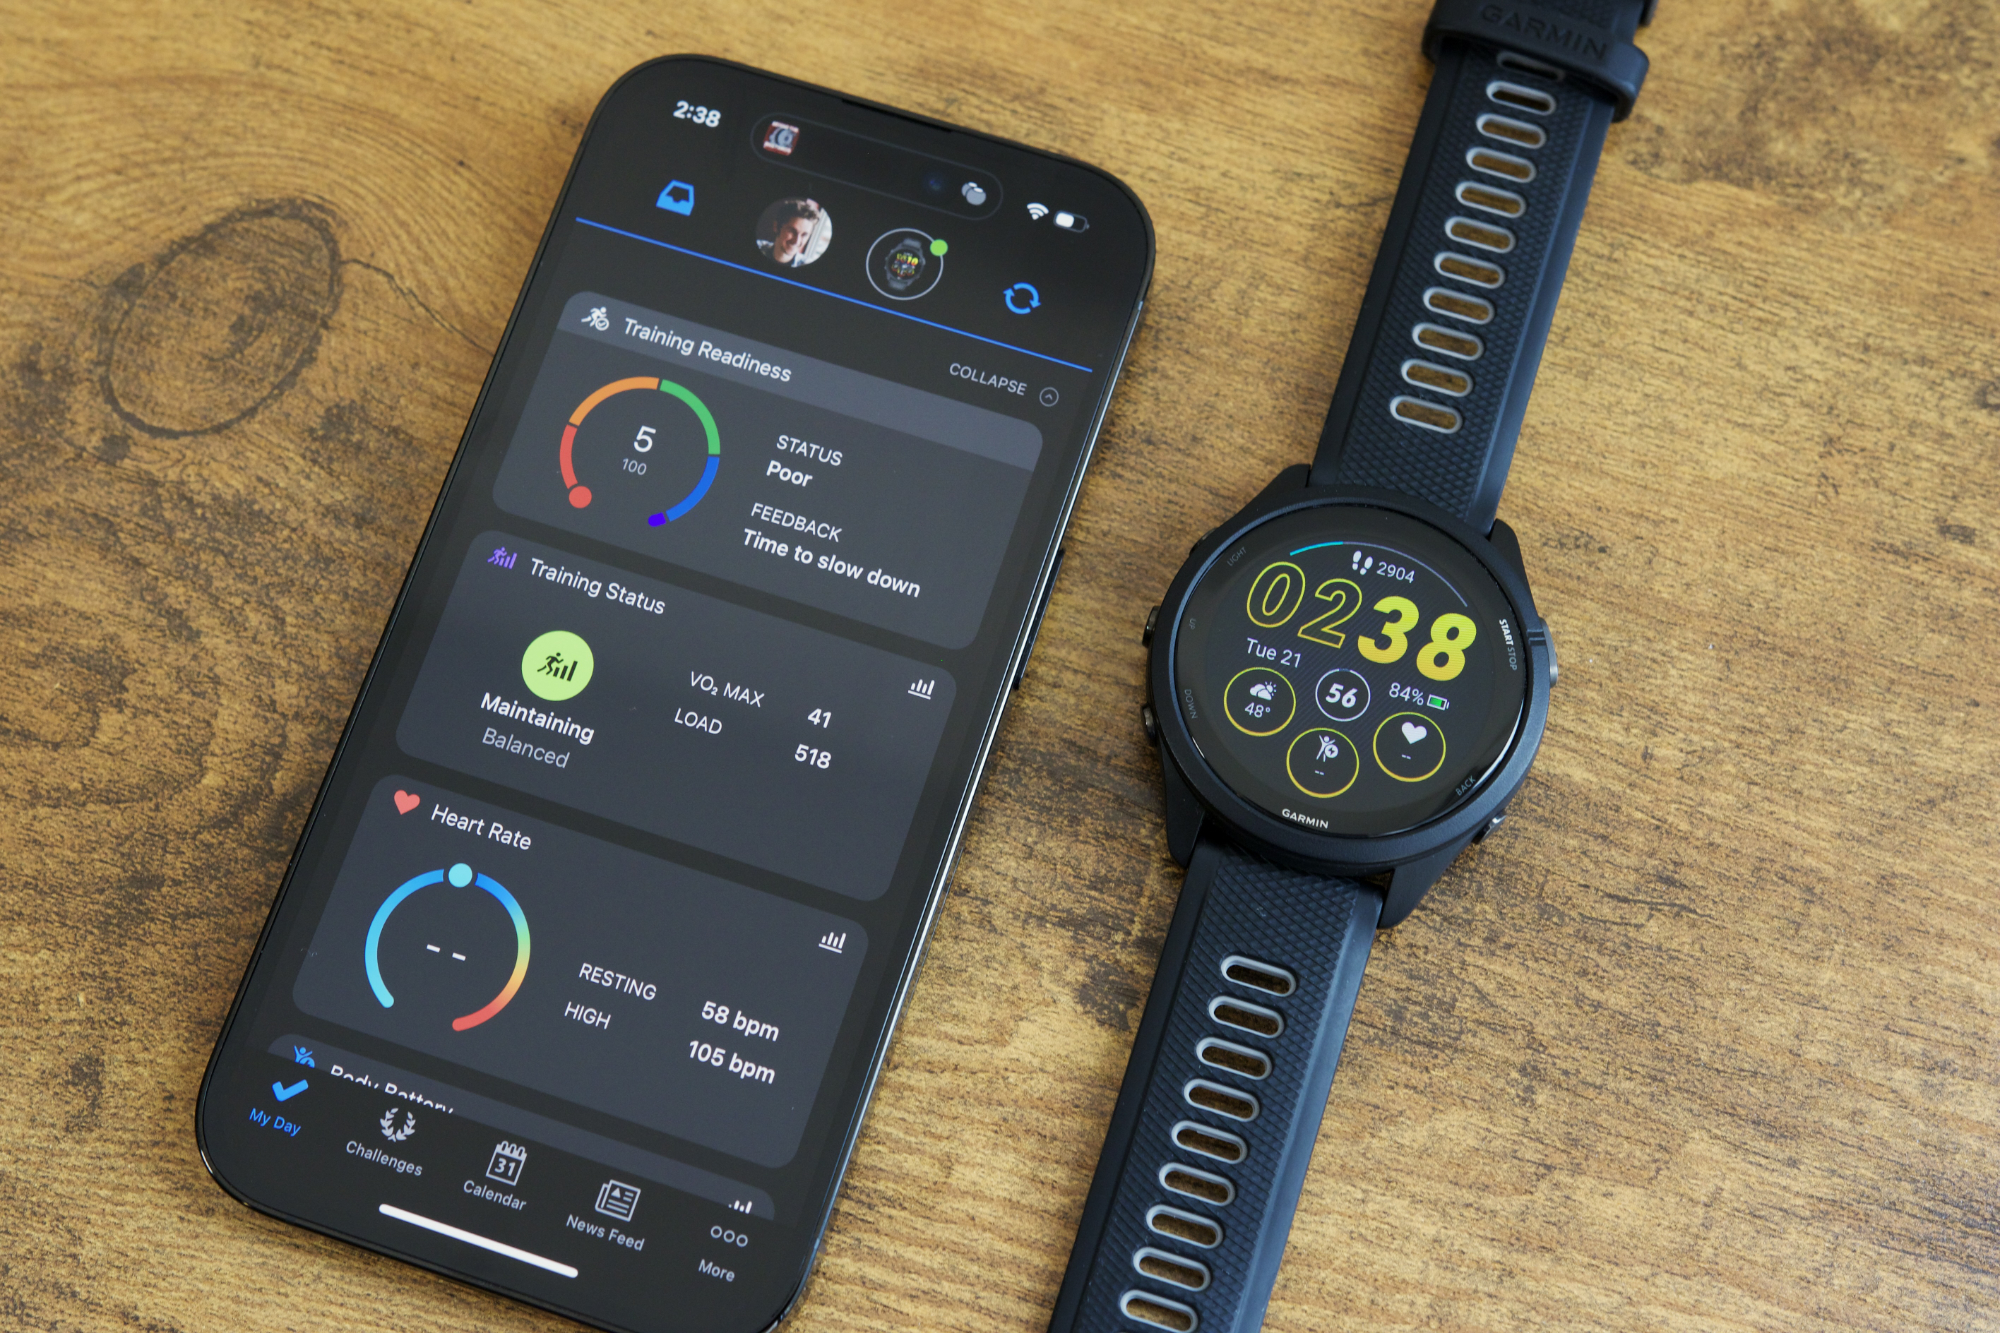 The app for your Garmin wearable is getting a huge overhaul